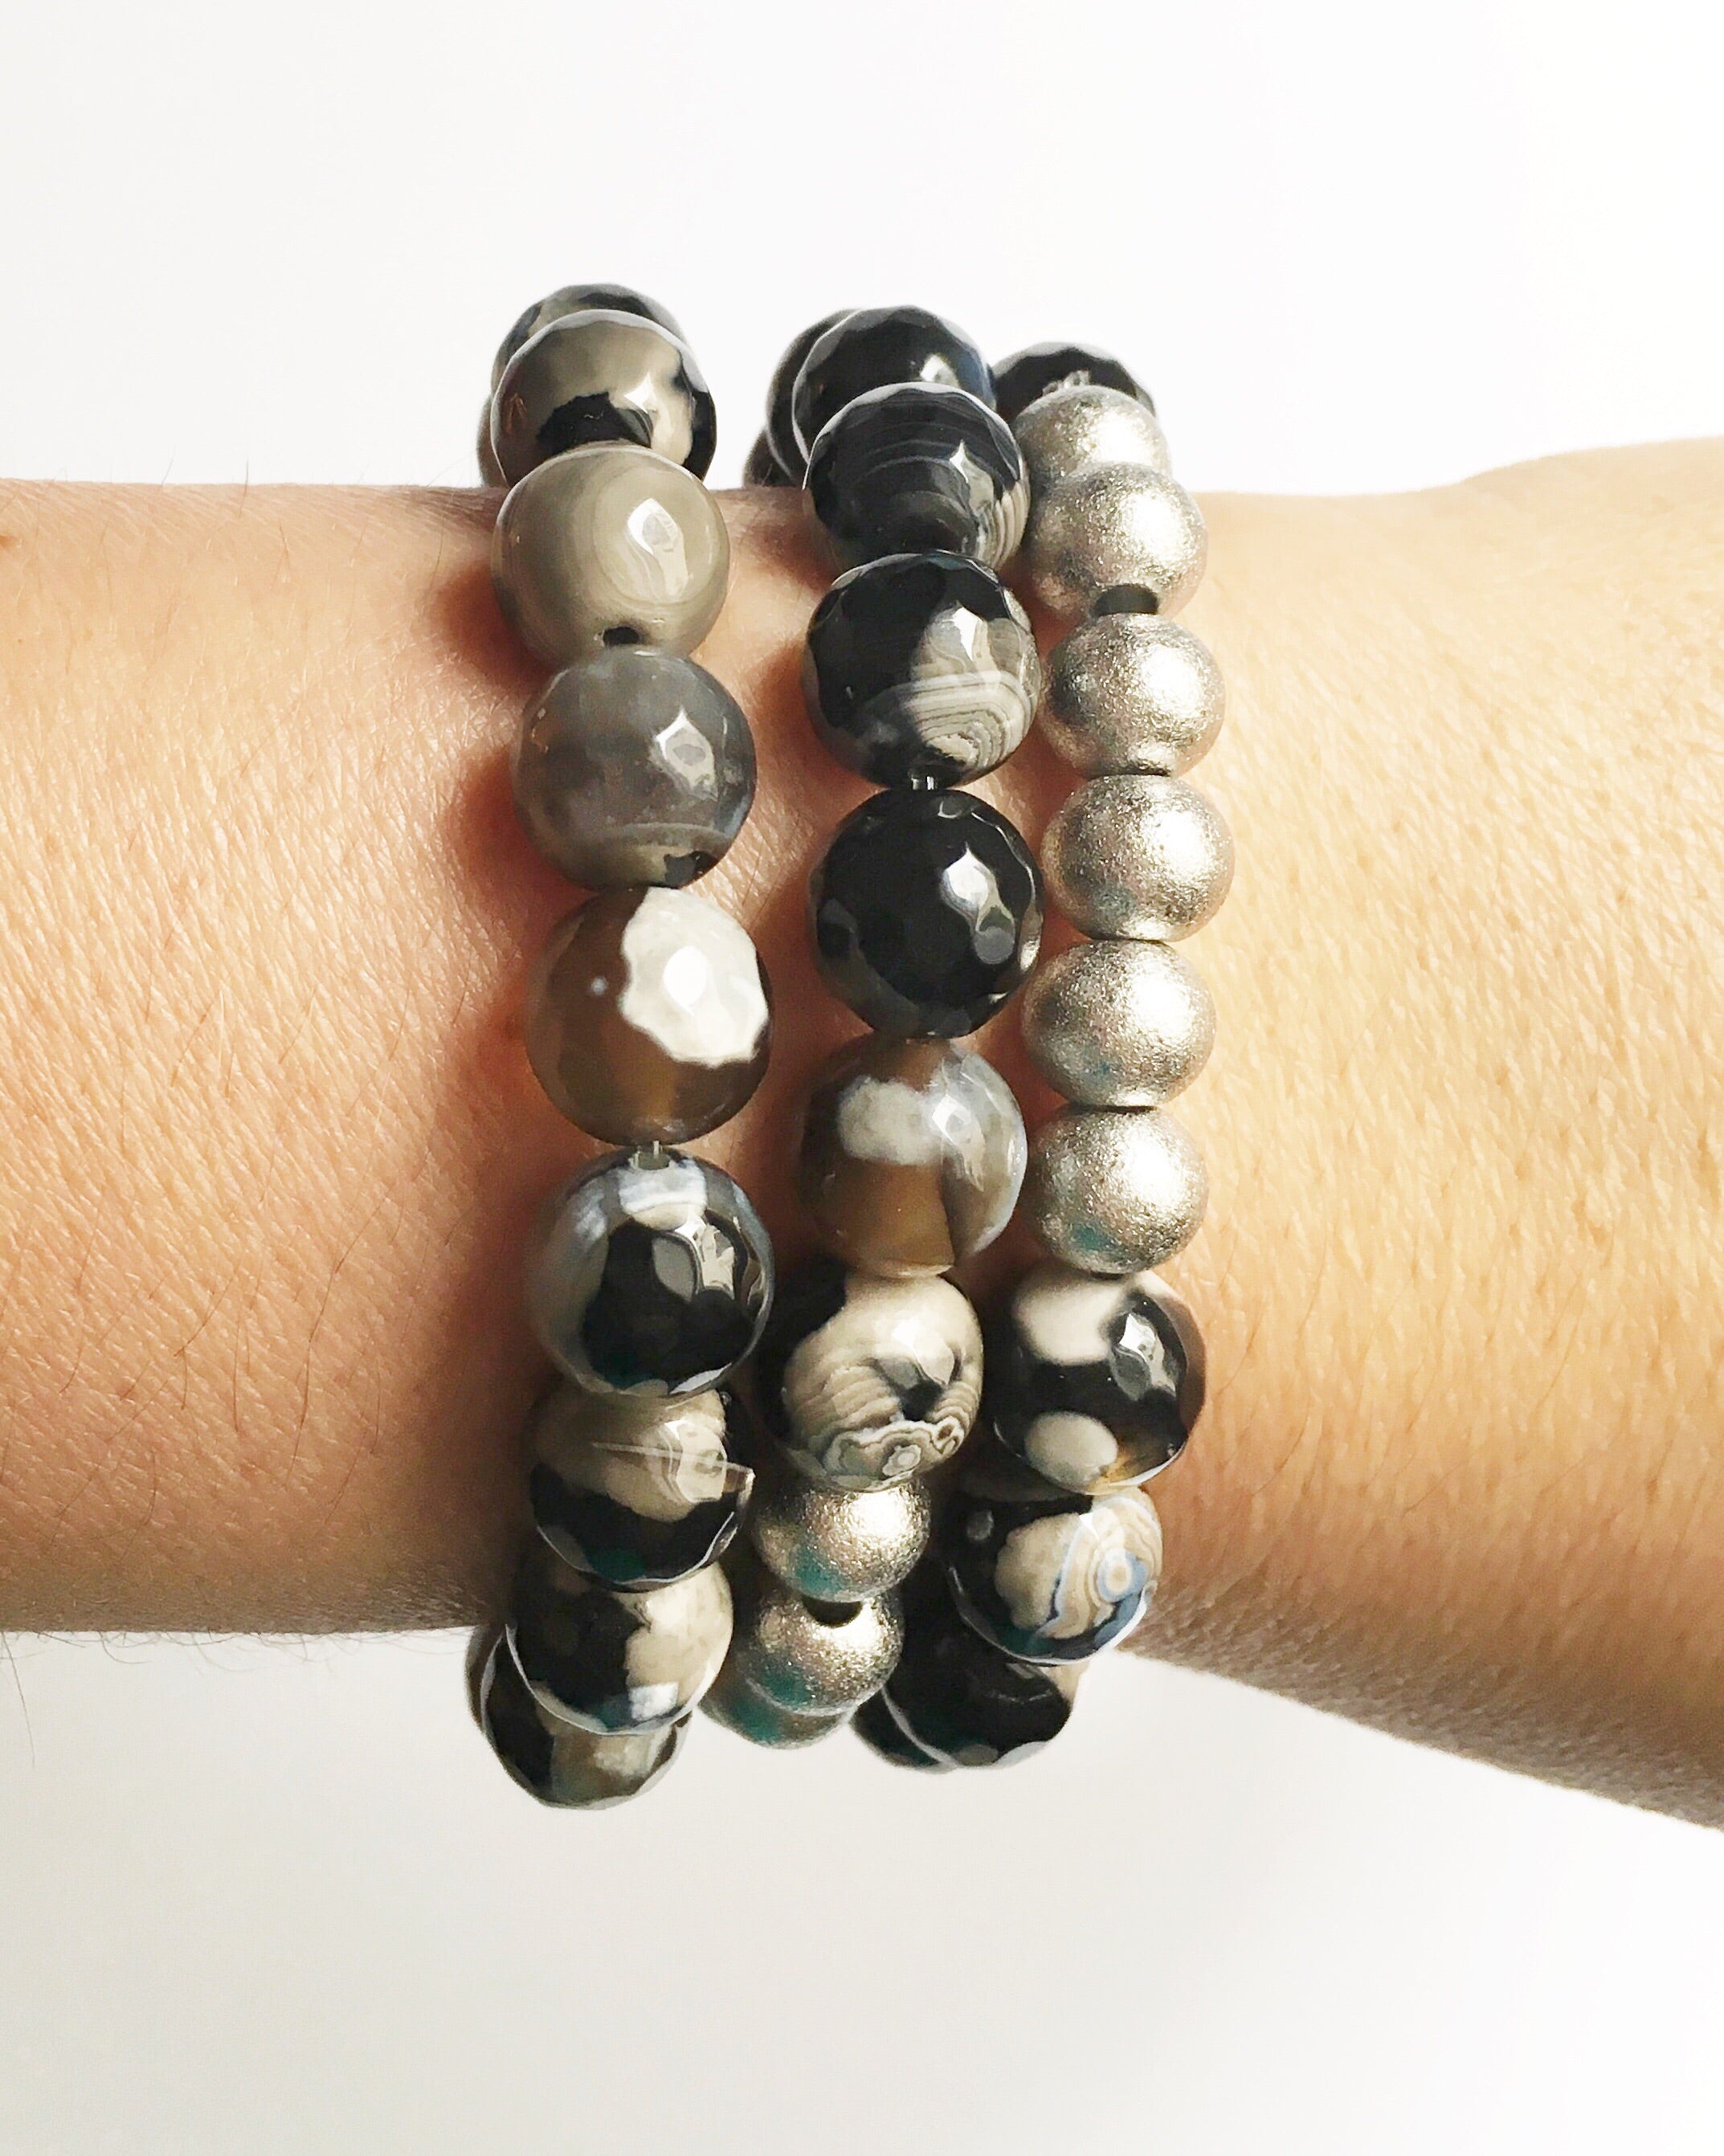 Women's wrist wearing three Black and Gray Agate with Silver Stacking Beaded Stretch Bracelets